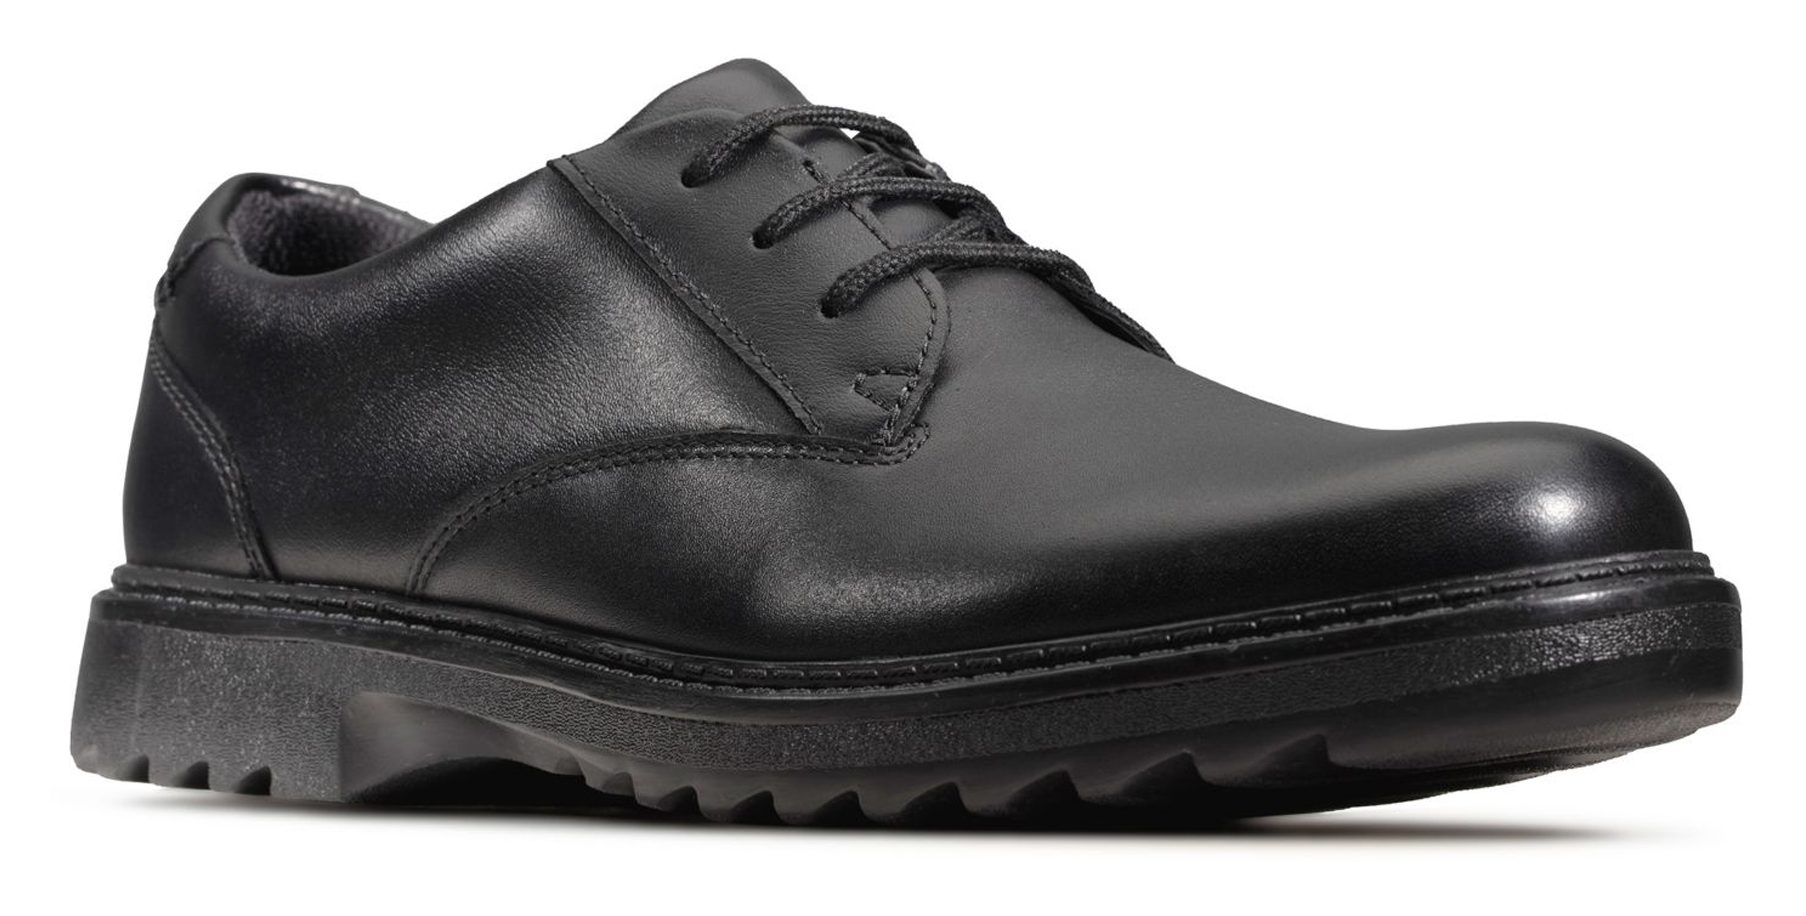 Clarks Asher Jazz Youth Black Leather 26149400 - Boys School Shoes ...